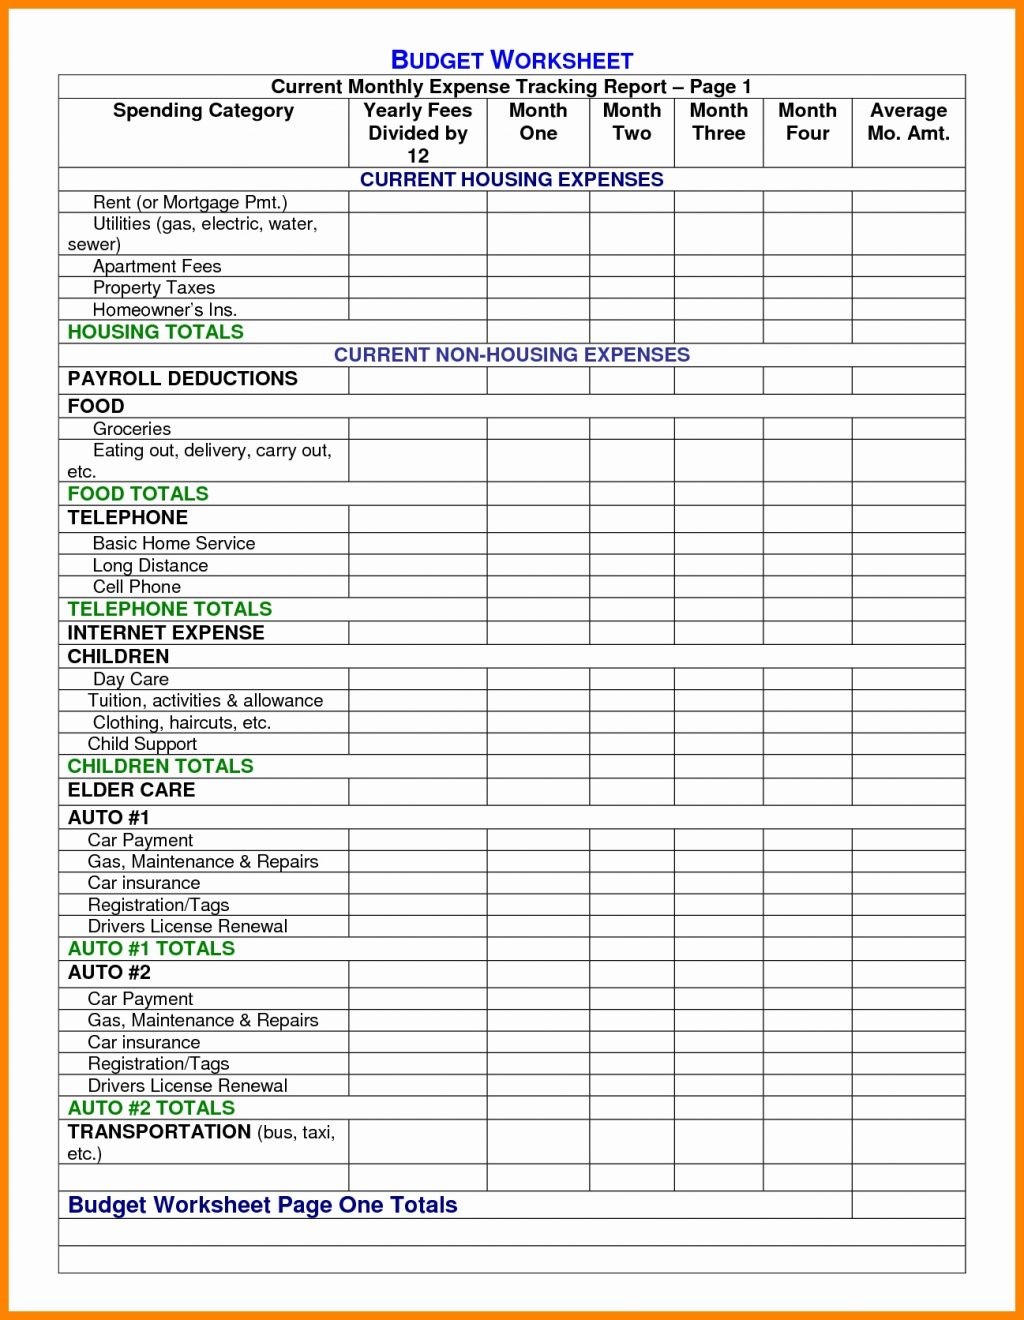 Building Construction Estimate Spreadsheet Excel Download As Document Weekly